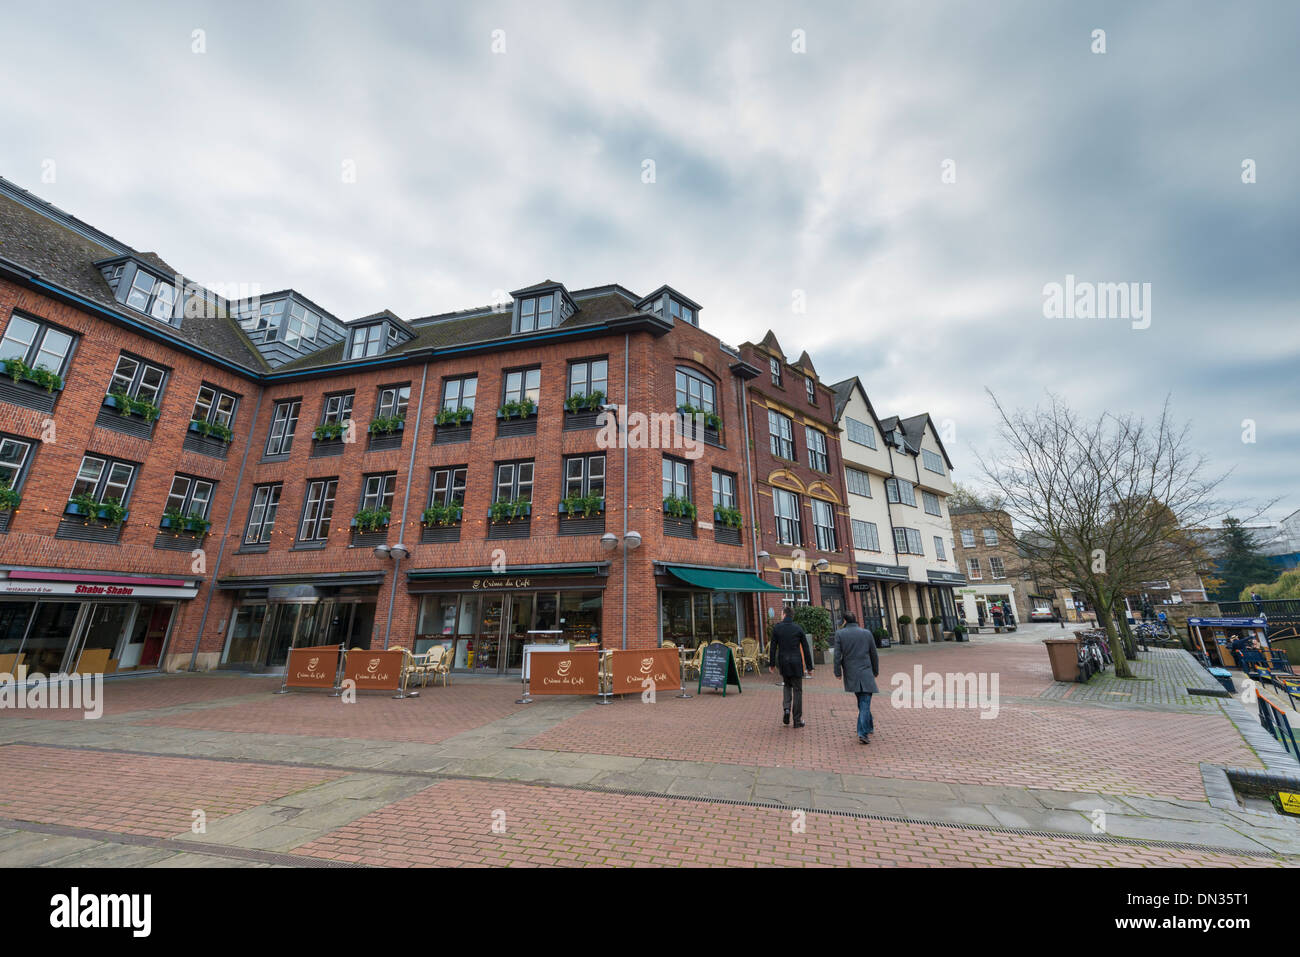 Cafes and restaurants in Quayside Cambridge UK on an overcast day Stock Photo